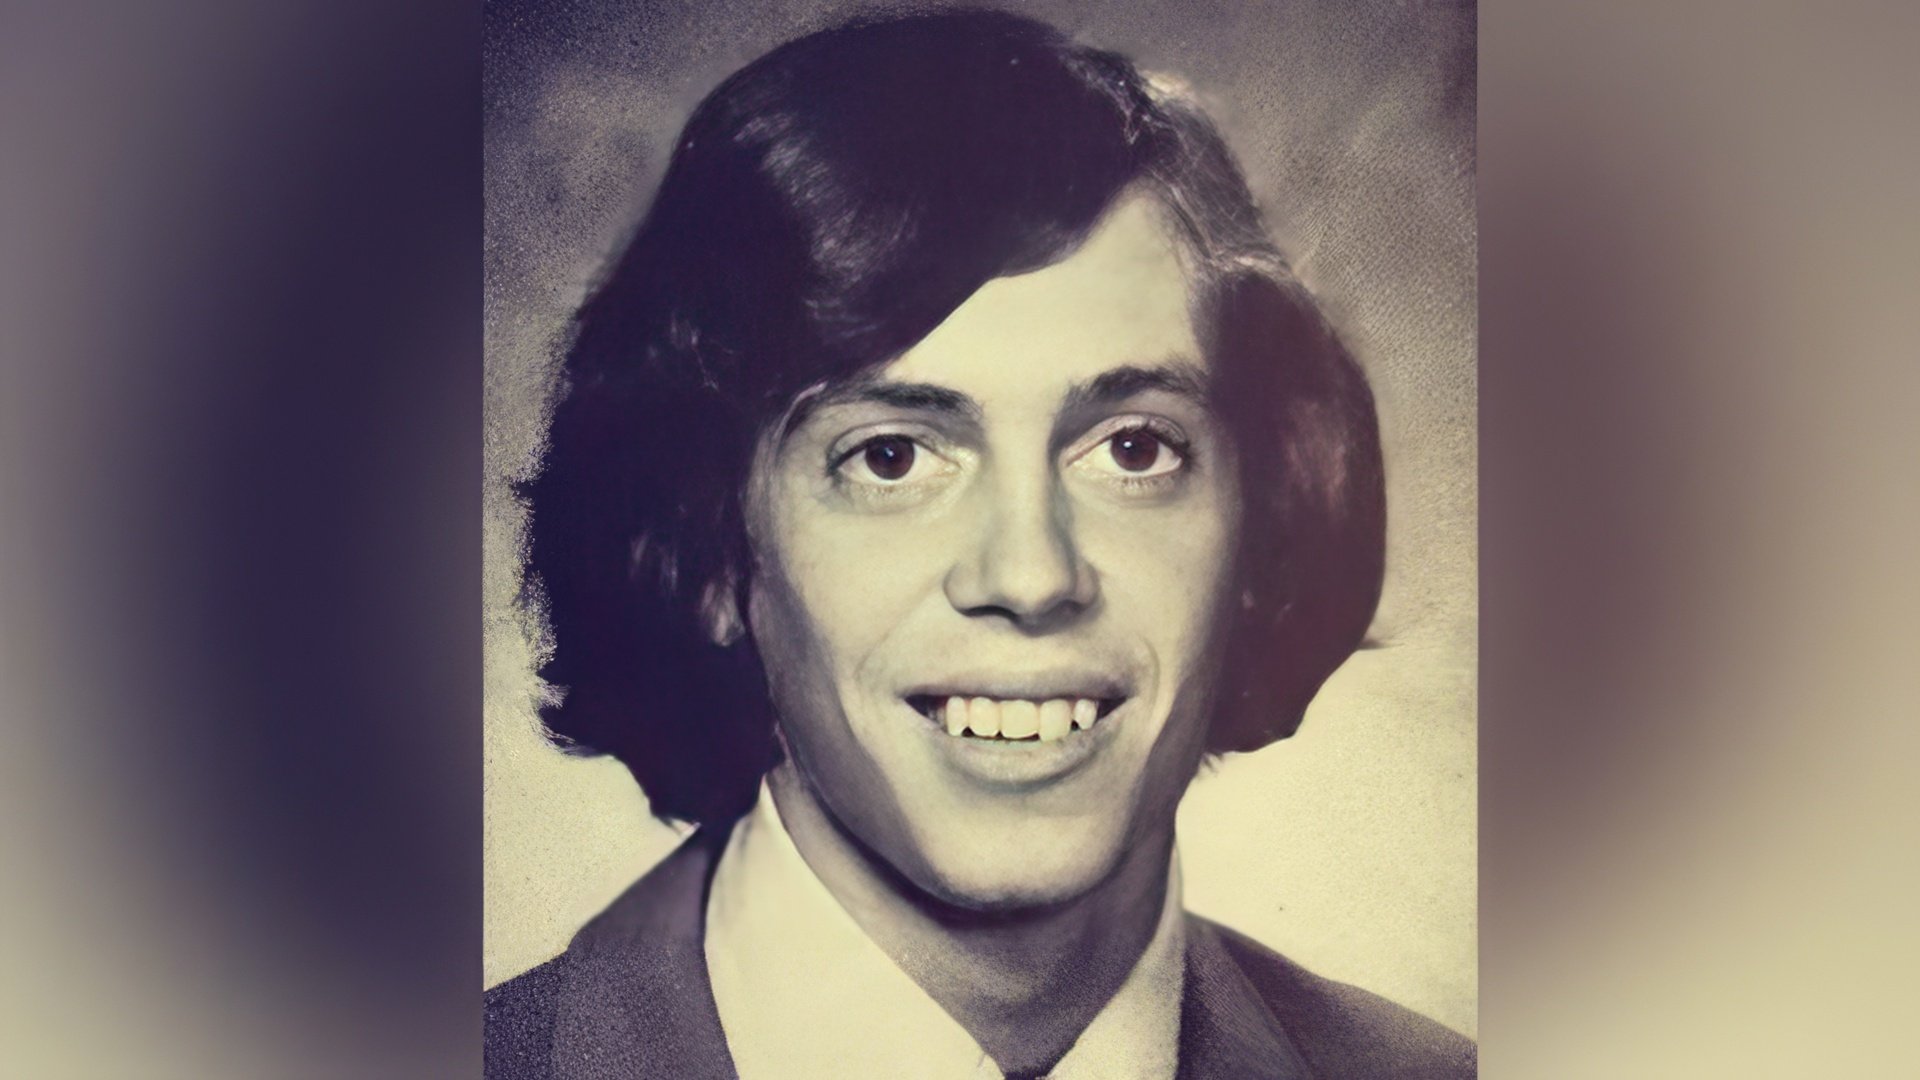 Steve Buscemi in young age